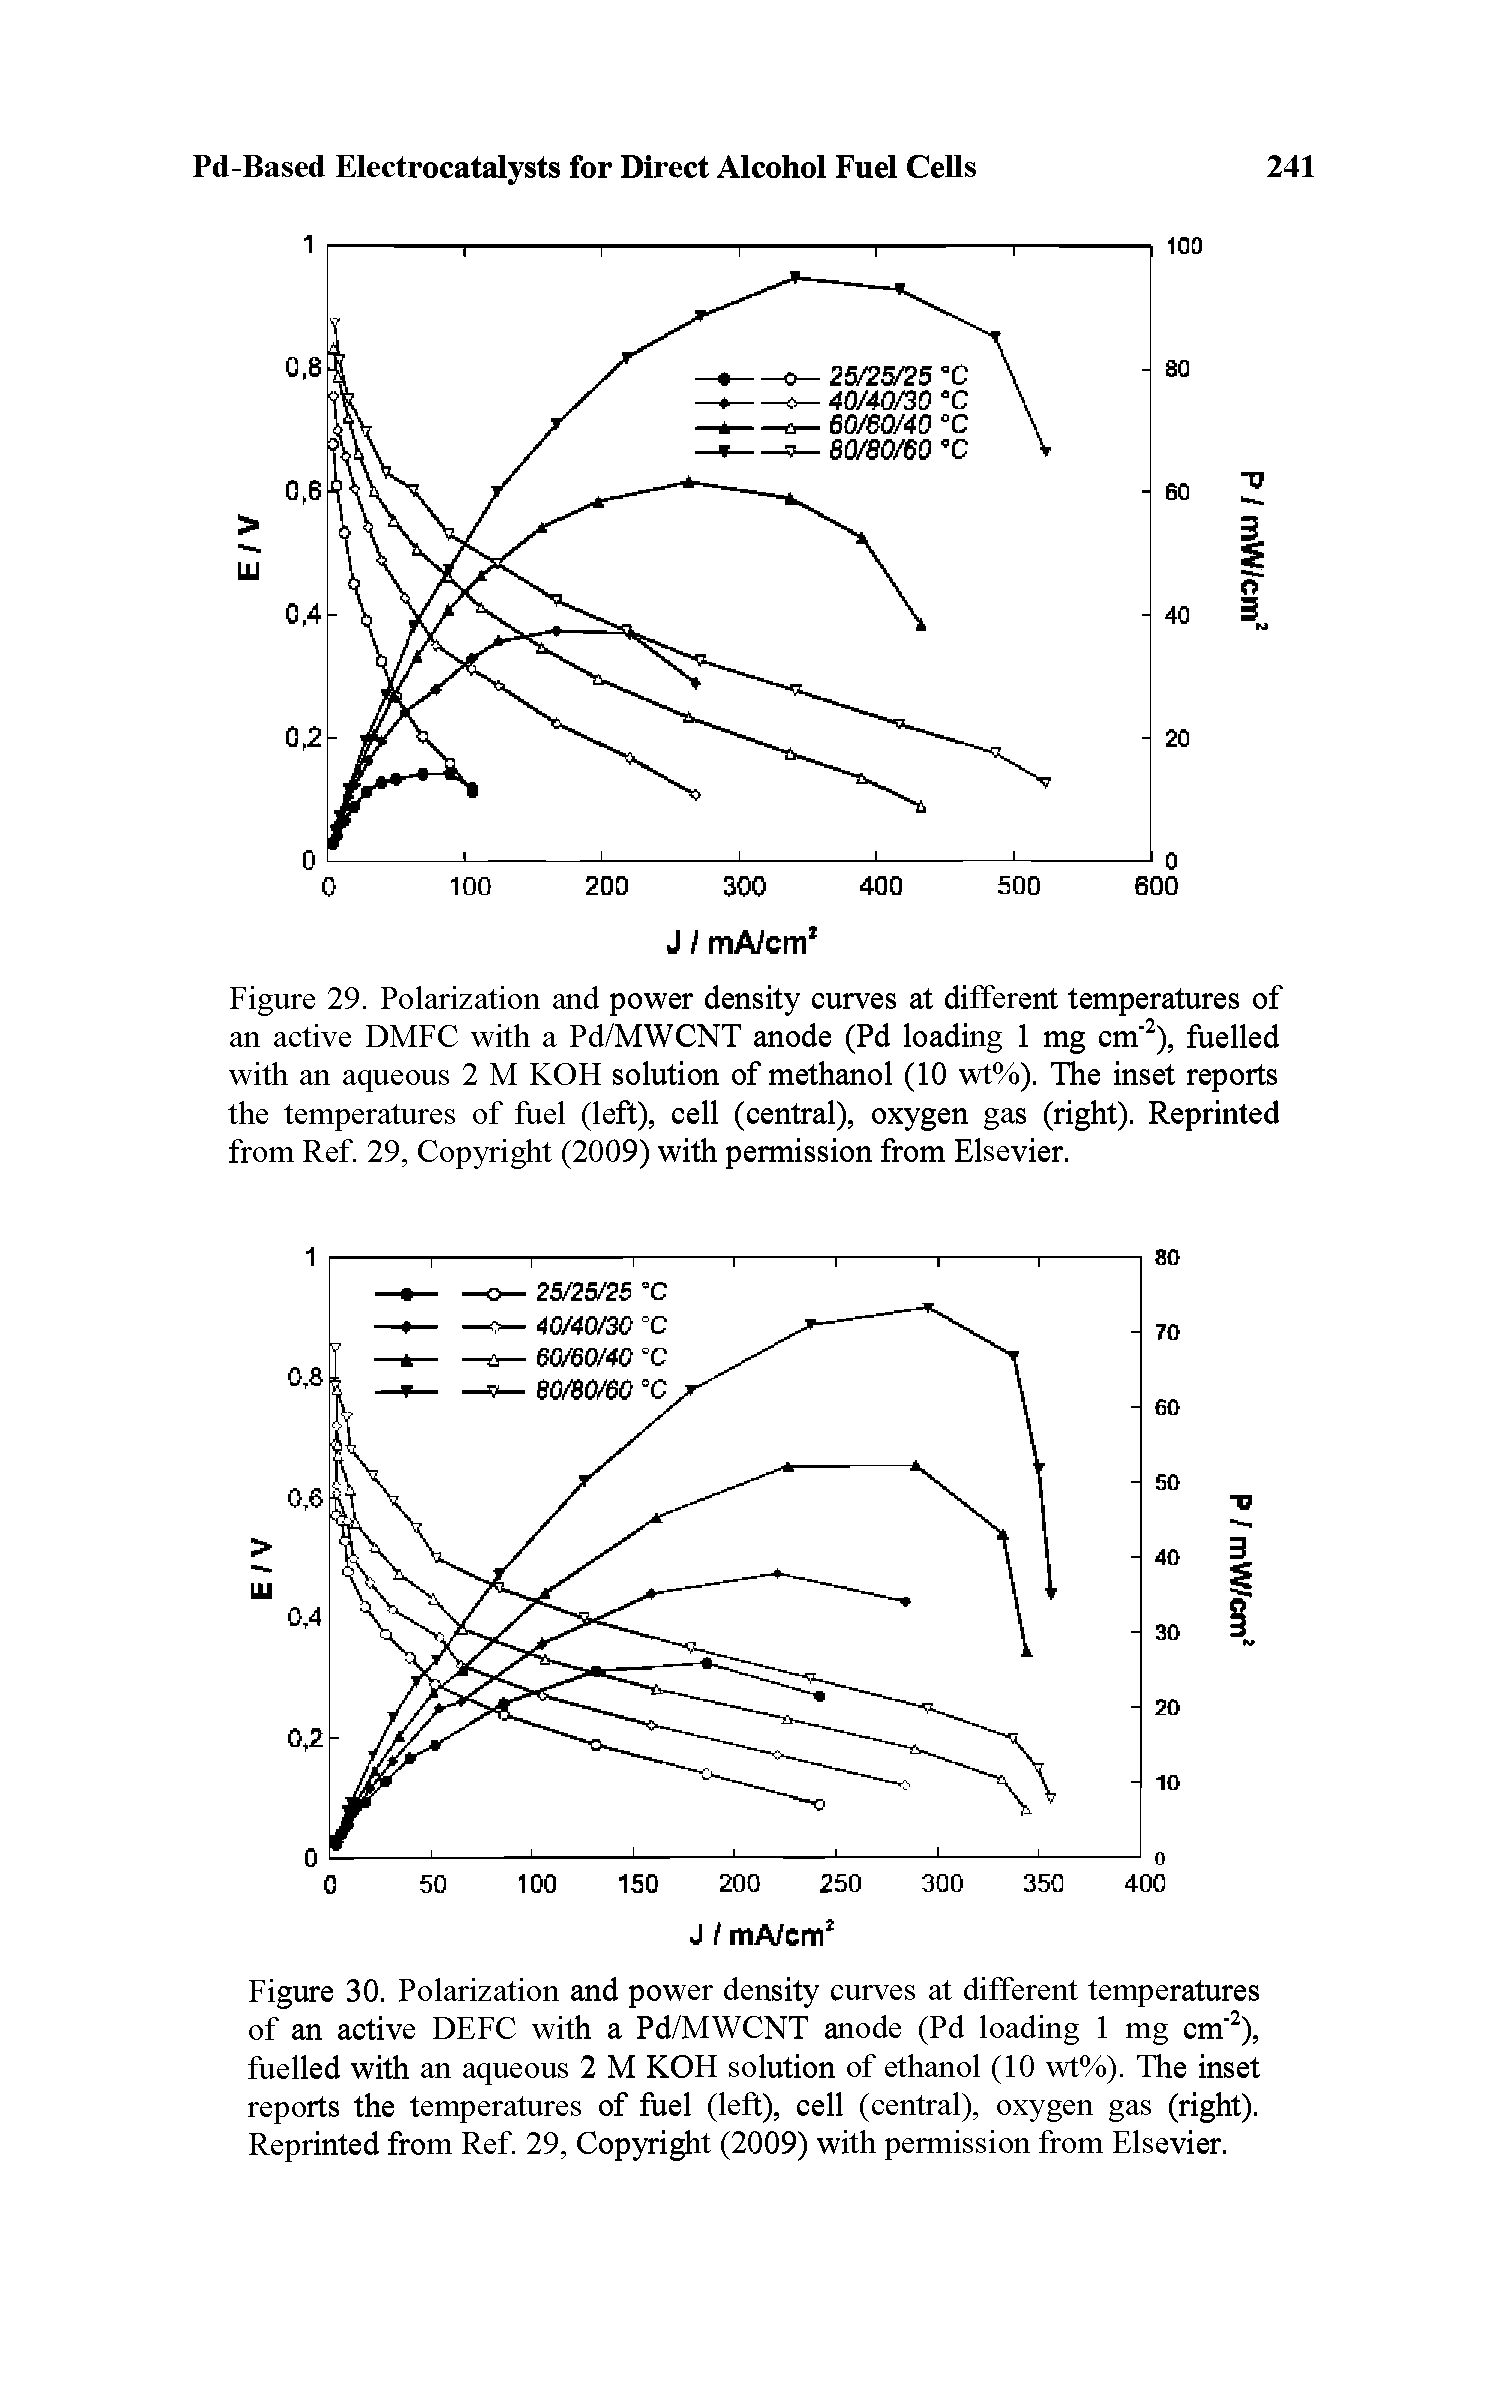 Figure 29. Polarization and power density curves at different temperatures of an active DMFC with a Pd/MWCNT anode (Pd loading 1 mg cm ), fuelled with an aqueous 2 M KOH solution of methanol (10 wt%). The inset reports the temperatures of fuel (left), cell (central), oxygen gas (right). Reprinted from Ref. 29, Copyright (2009) with permission from Elsevier.